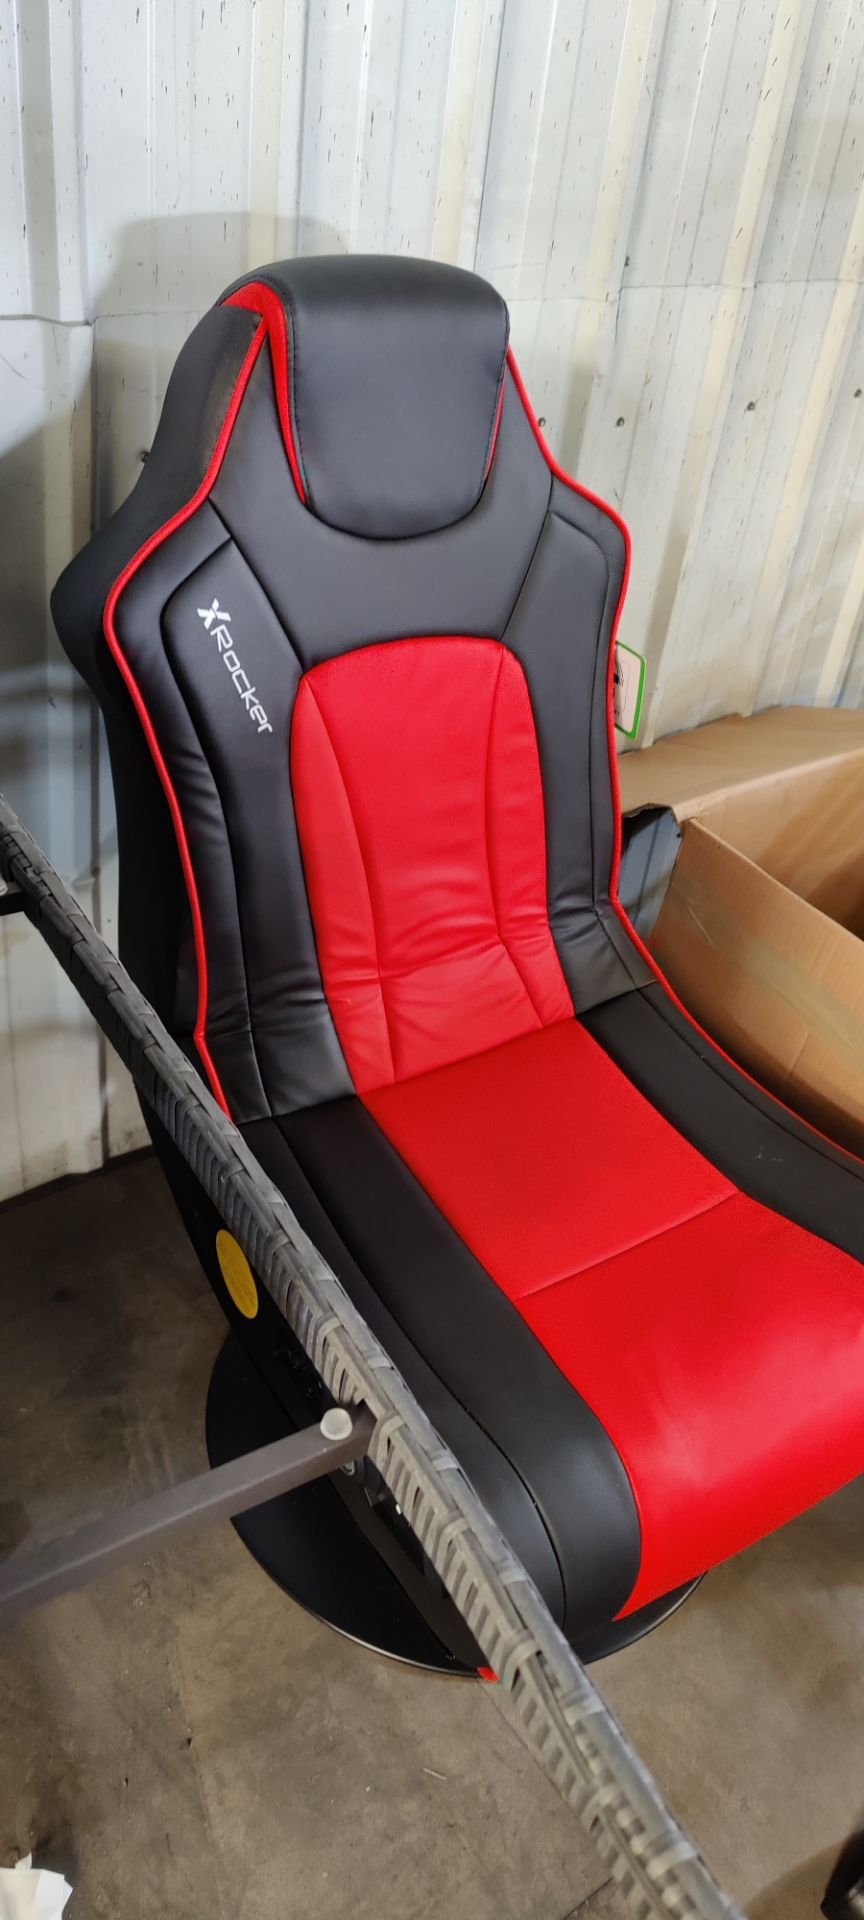 (P2) X-Rocker Torque Multimedia Gaming Chair RRP £259.99. Unit Appears Complete, Box Damaged. Item - Image 6 of 6